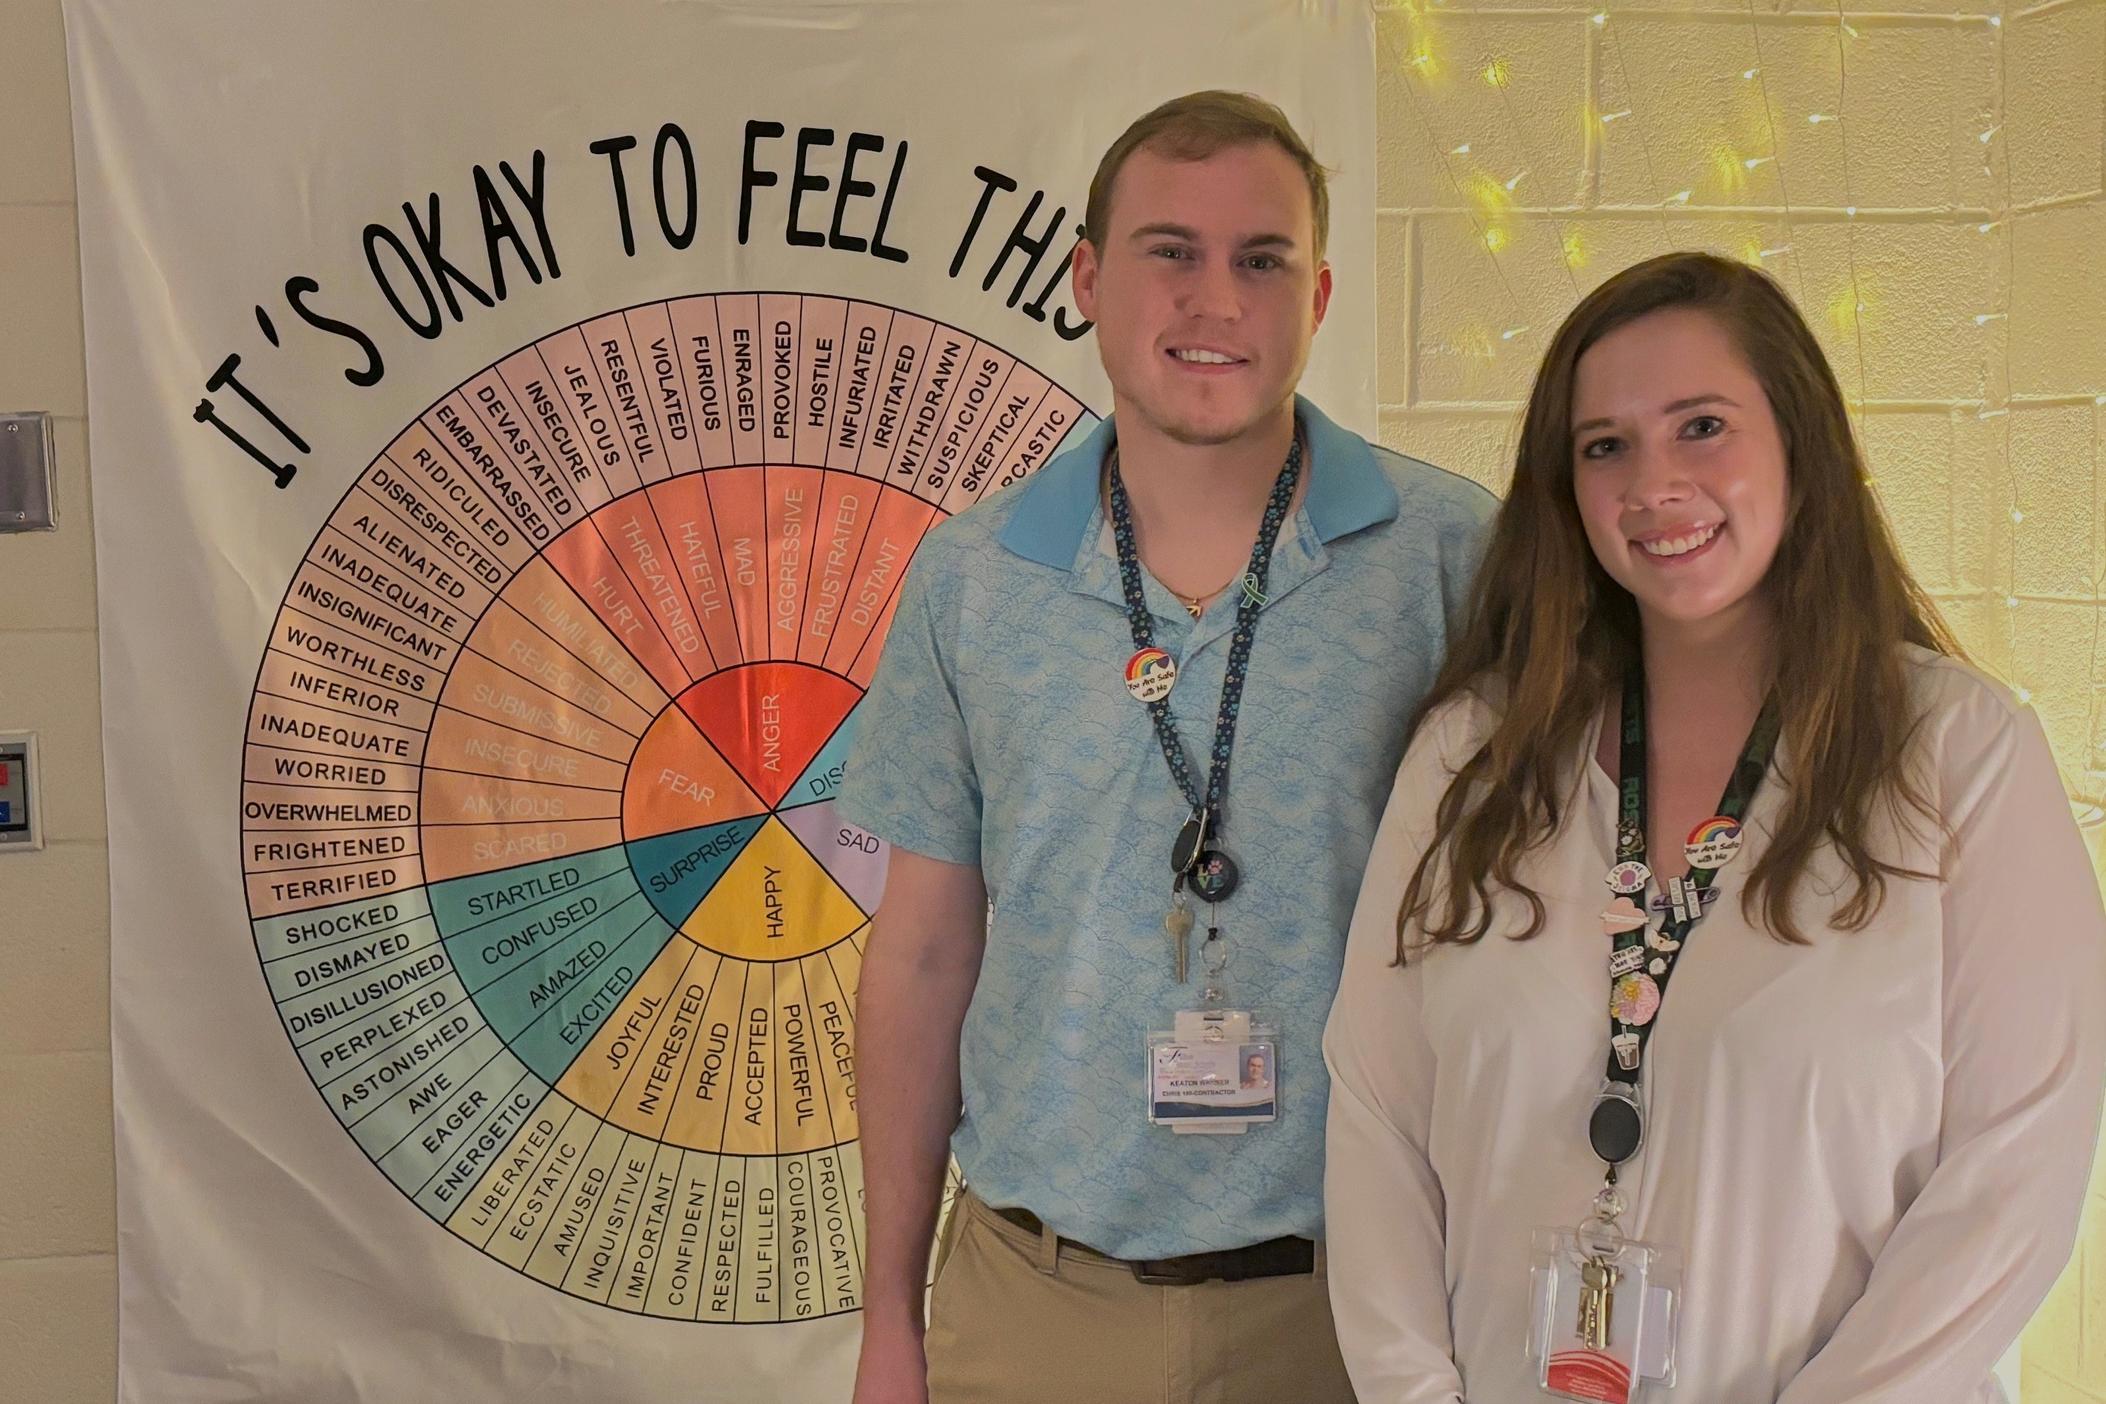 Keaton Warner and Jillian Canada stand in front of a poster with a wheel of feelings at Roswell High School.